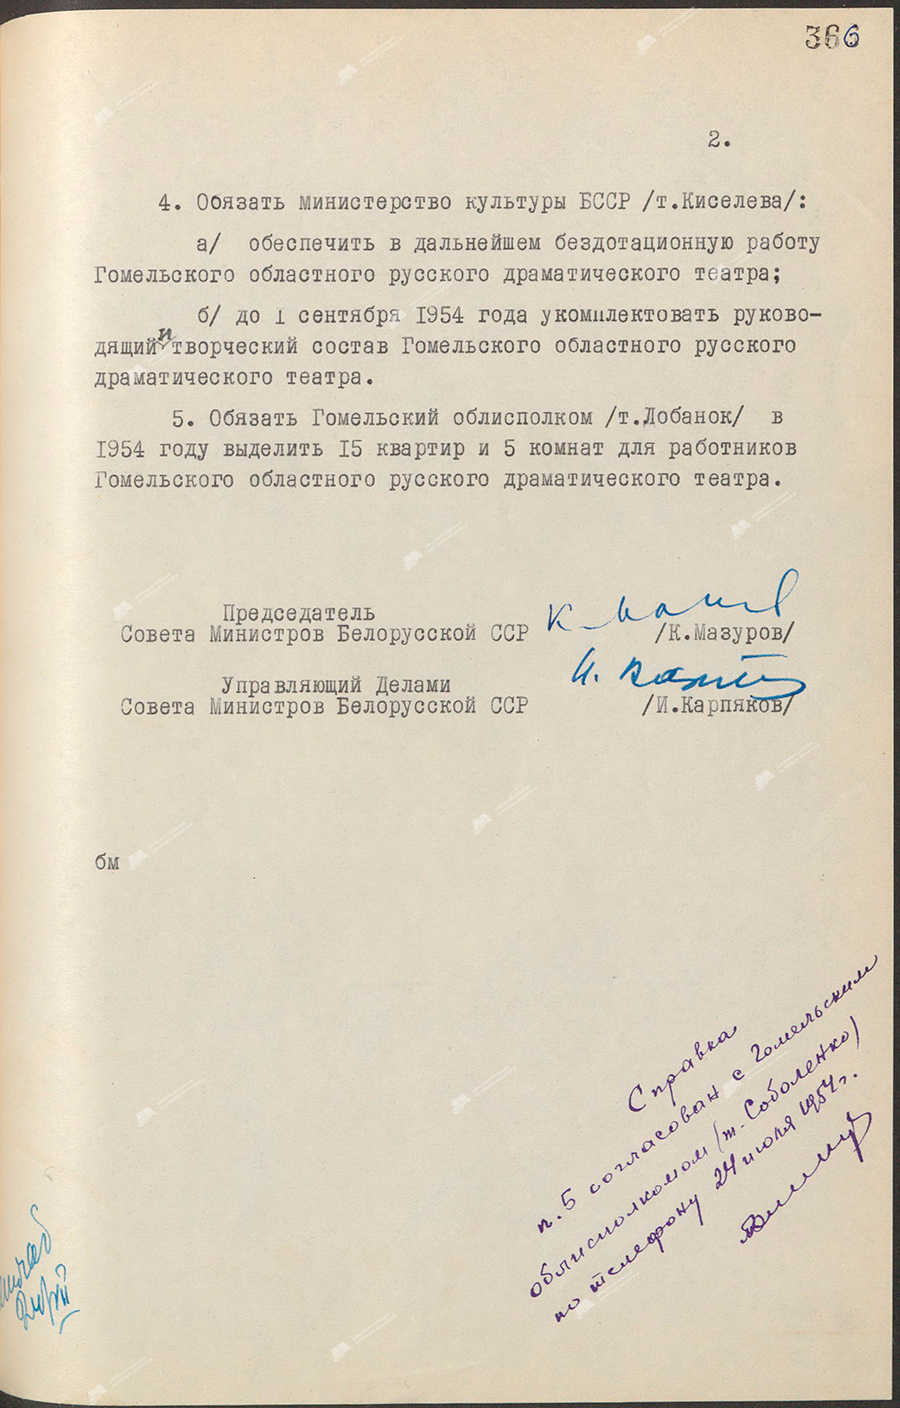 Resolution No. 697 of the Council of Ministers of the Byelorussian SSR «On the organization of the Gomel Regional Russian Drama Theater»-стр. 1